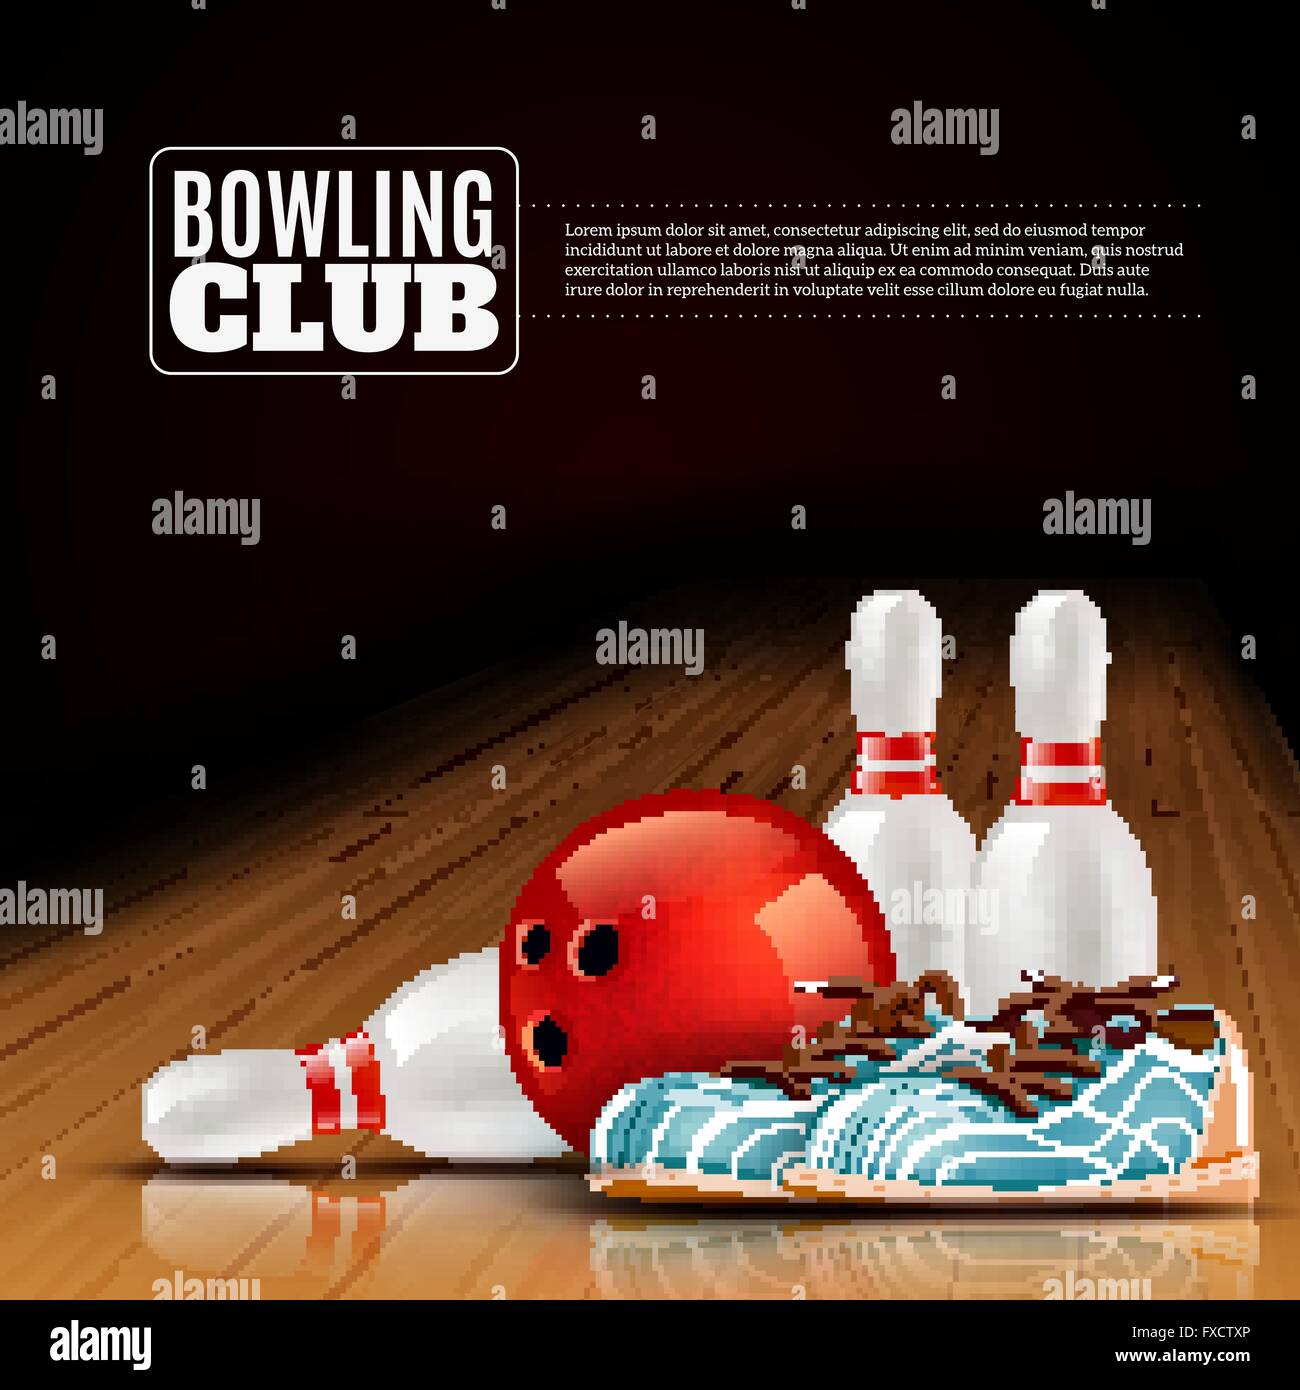 Bowling league indoor club poster Stock Vector